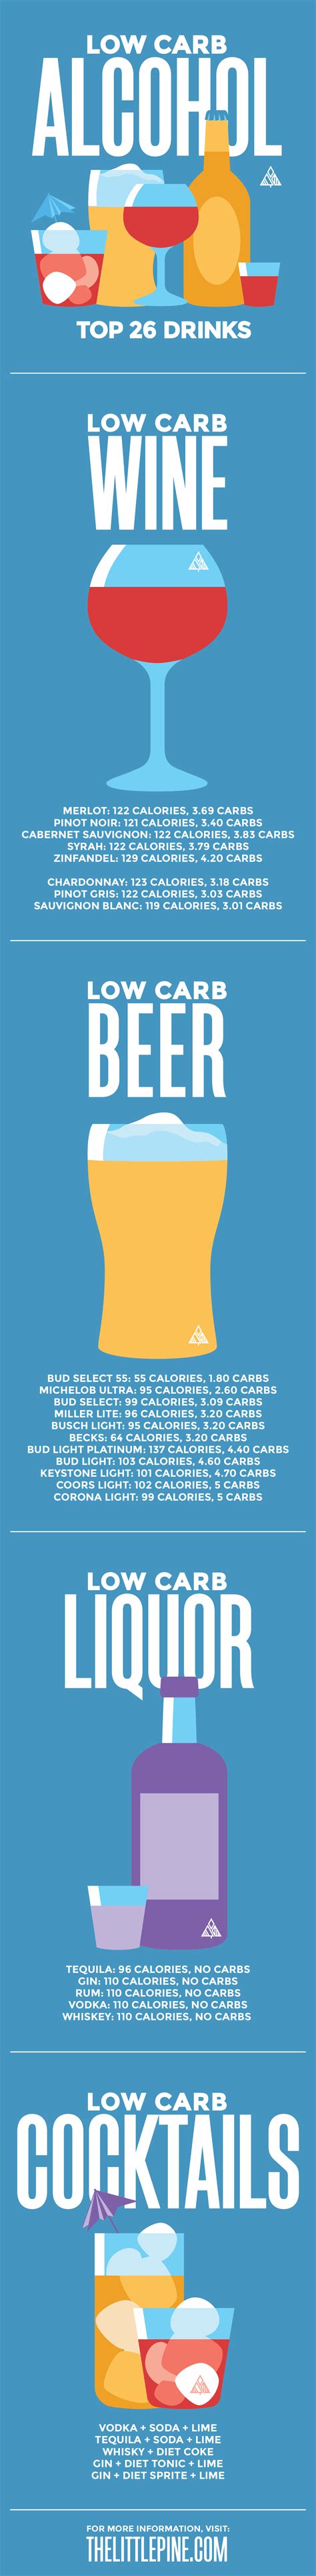 But rather than always being on a diet, it's nice to incorporate small changes that don't require you to feel deprived. Guide to Low Carb Alcohol — Top 26 Drinks + What to Avoid ...